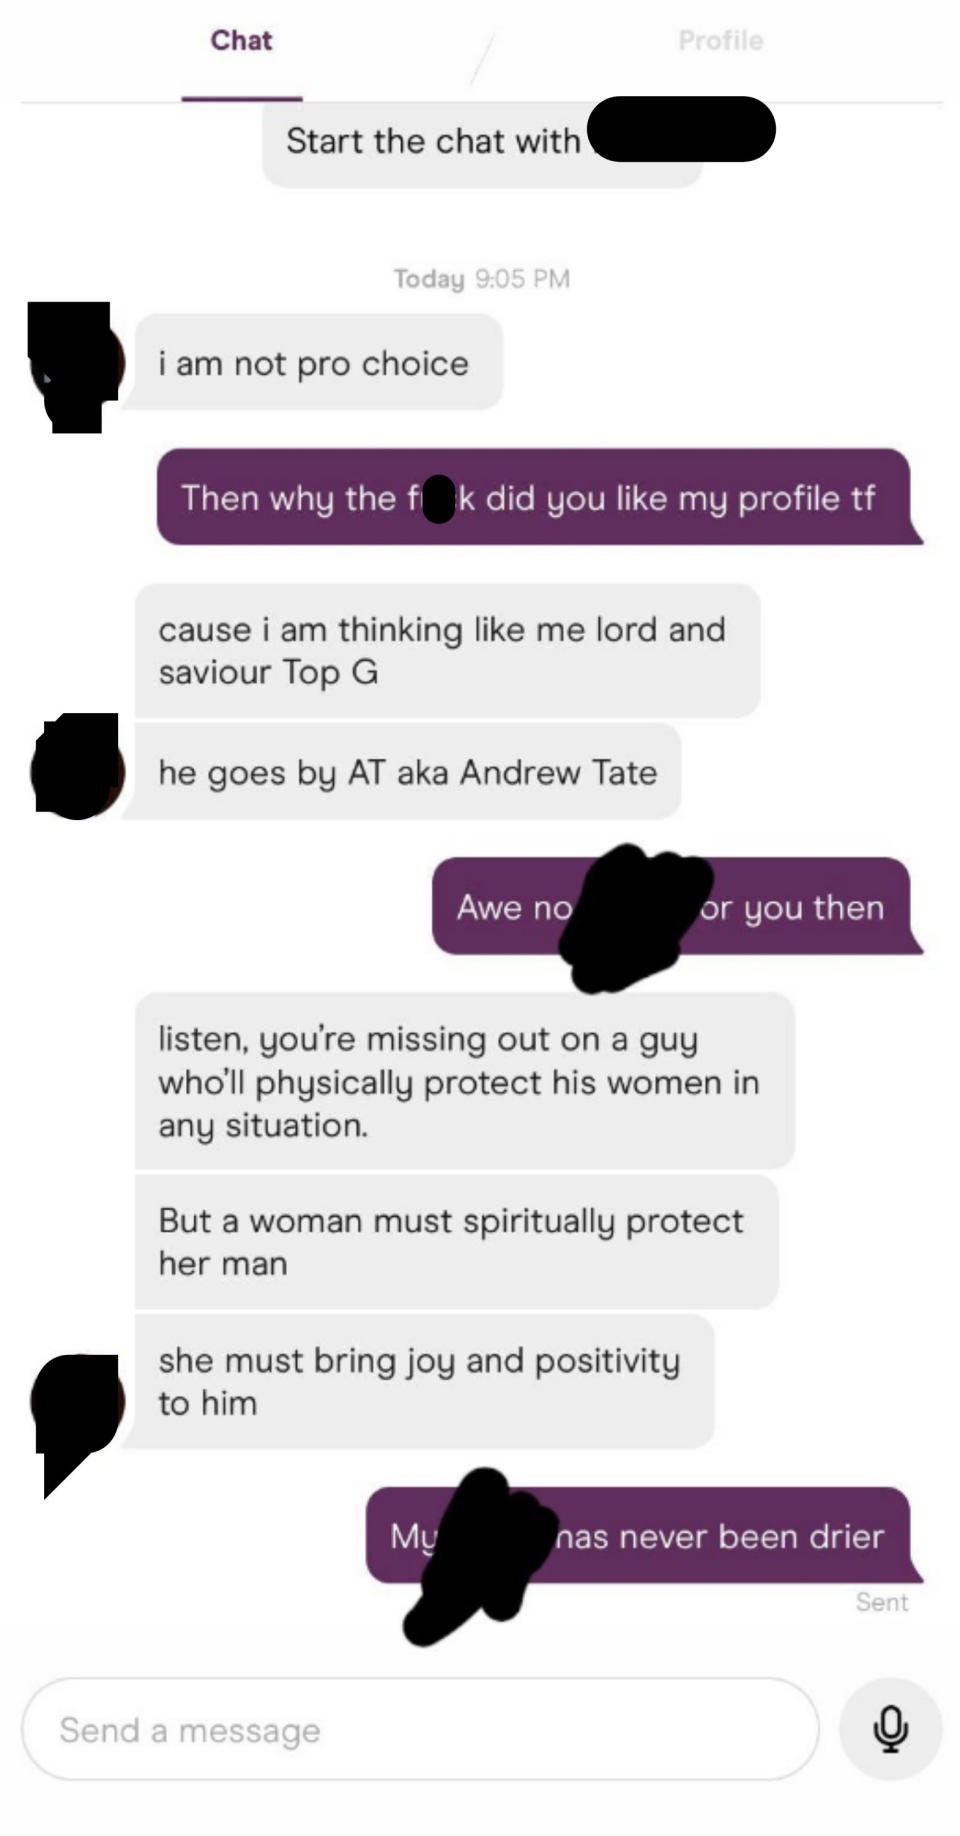 A man opens conversation by saying he's not pro-choice, then goes on to say he follows Andrew Tate and that he can physically protect women but they must spiritually protect him